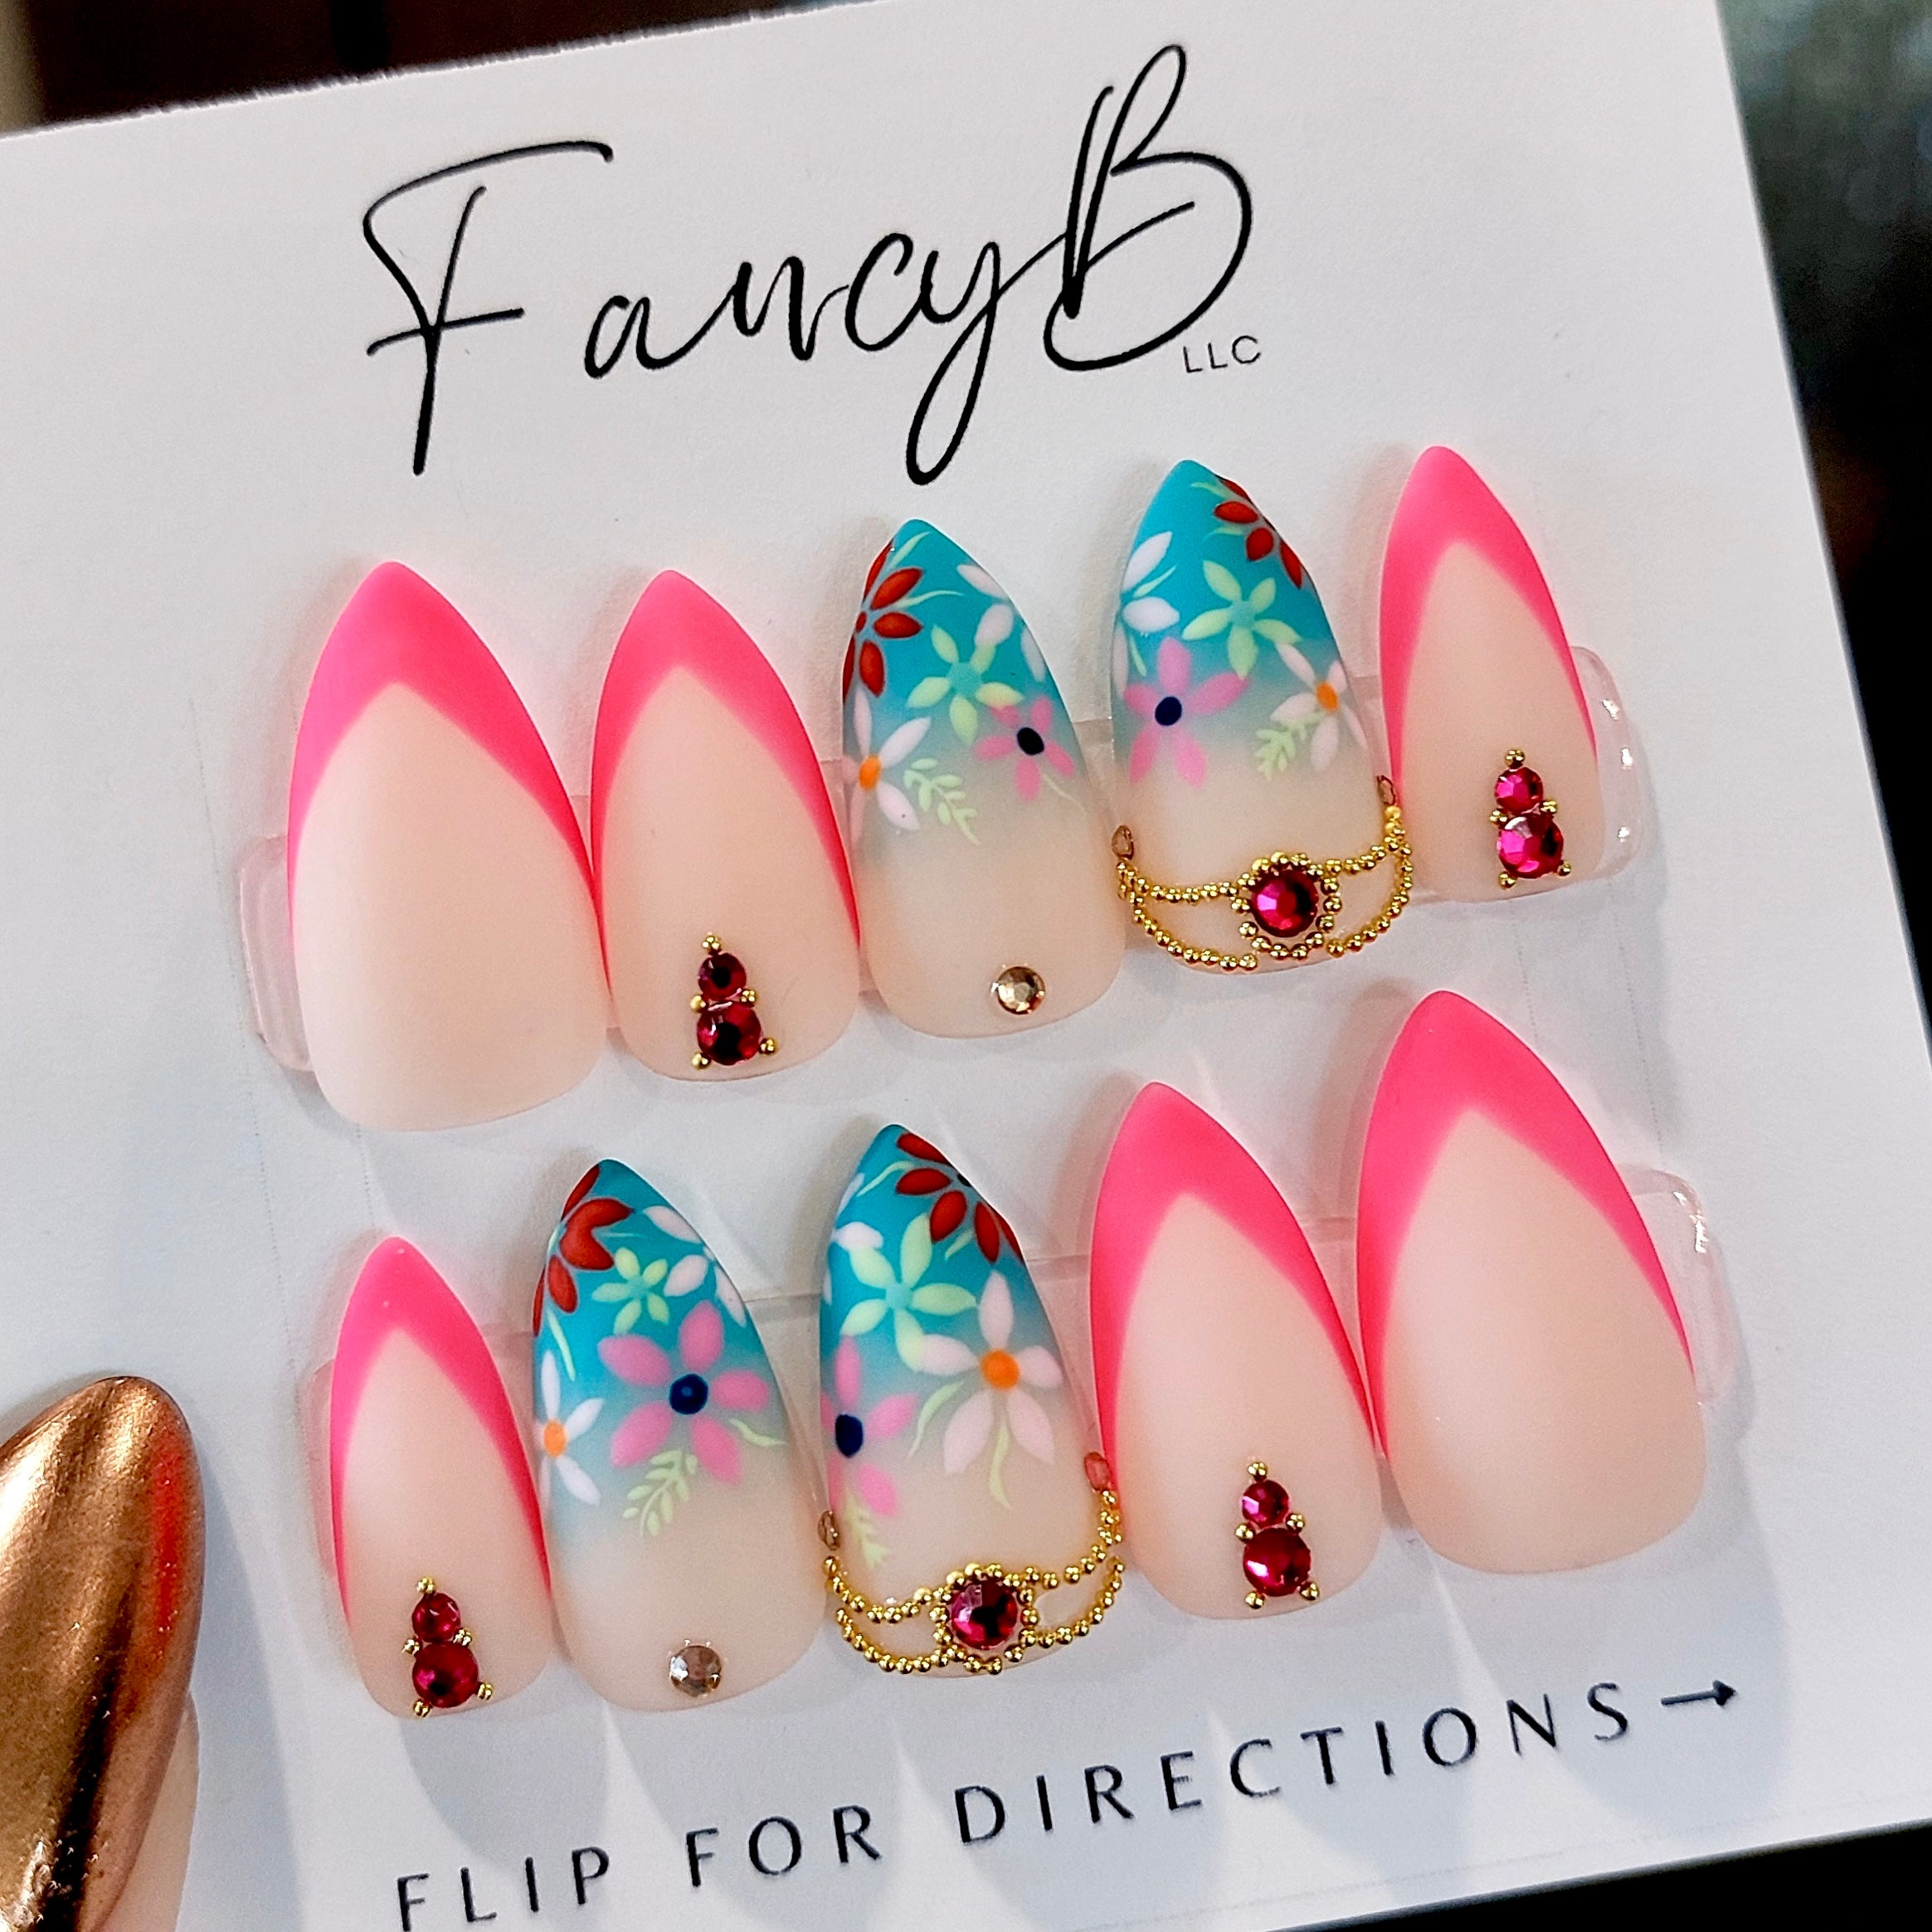 Custom press on nails with hand painted floral designs, hot pink french tips and blue teal ombre accents, ruby and pink gems and gold decorative pieces. Sharp short stiletto nail shape. FancyB Nails.